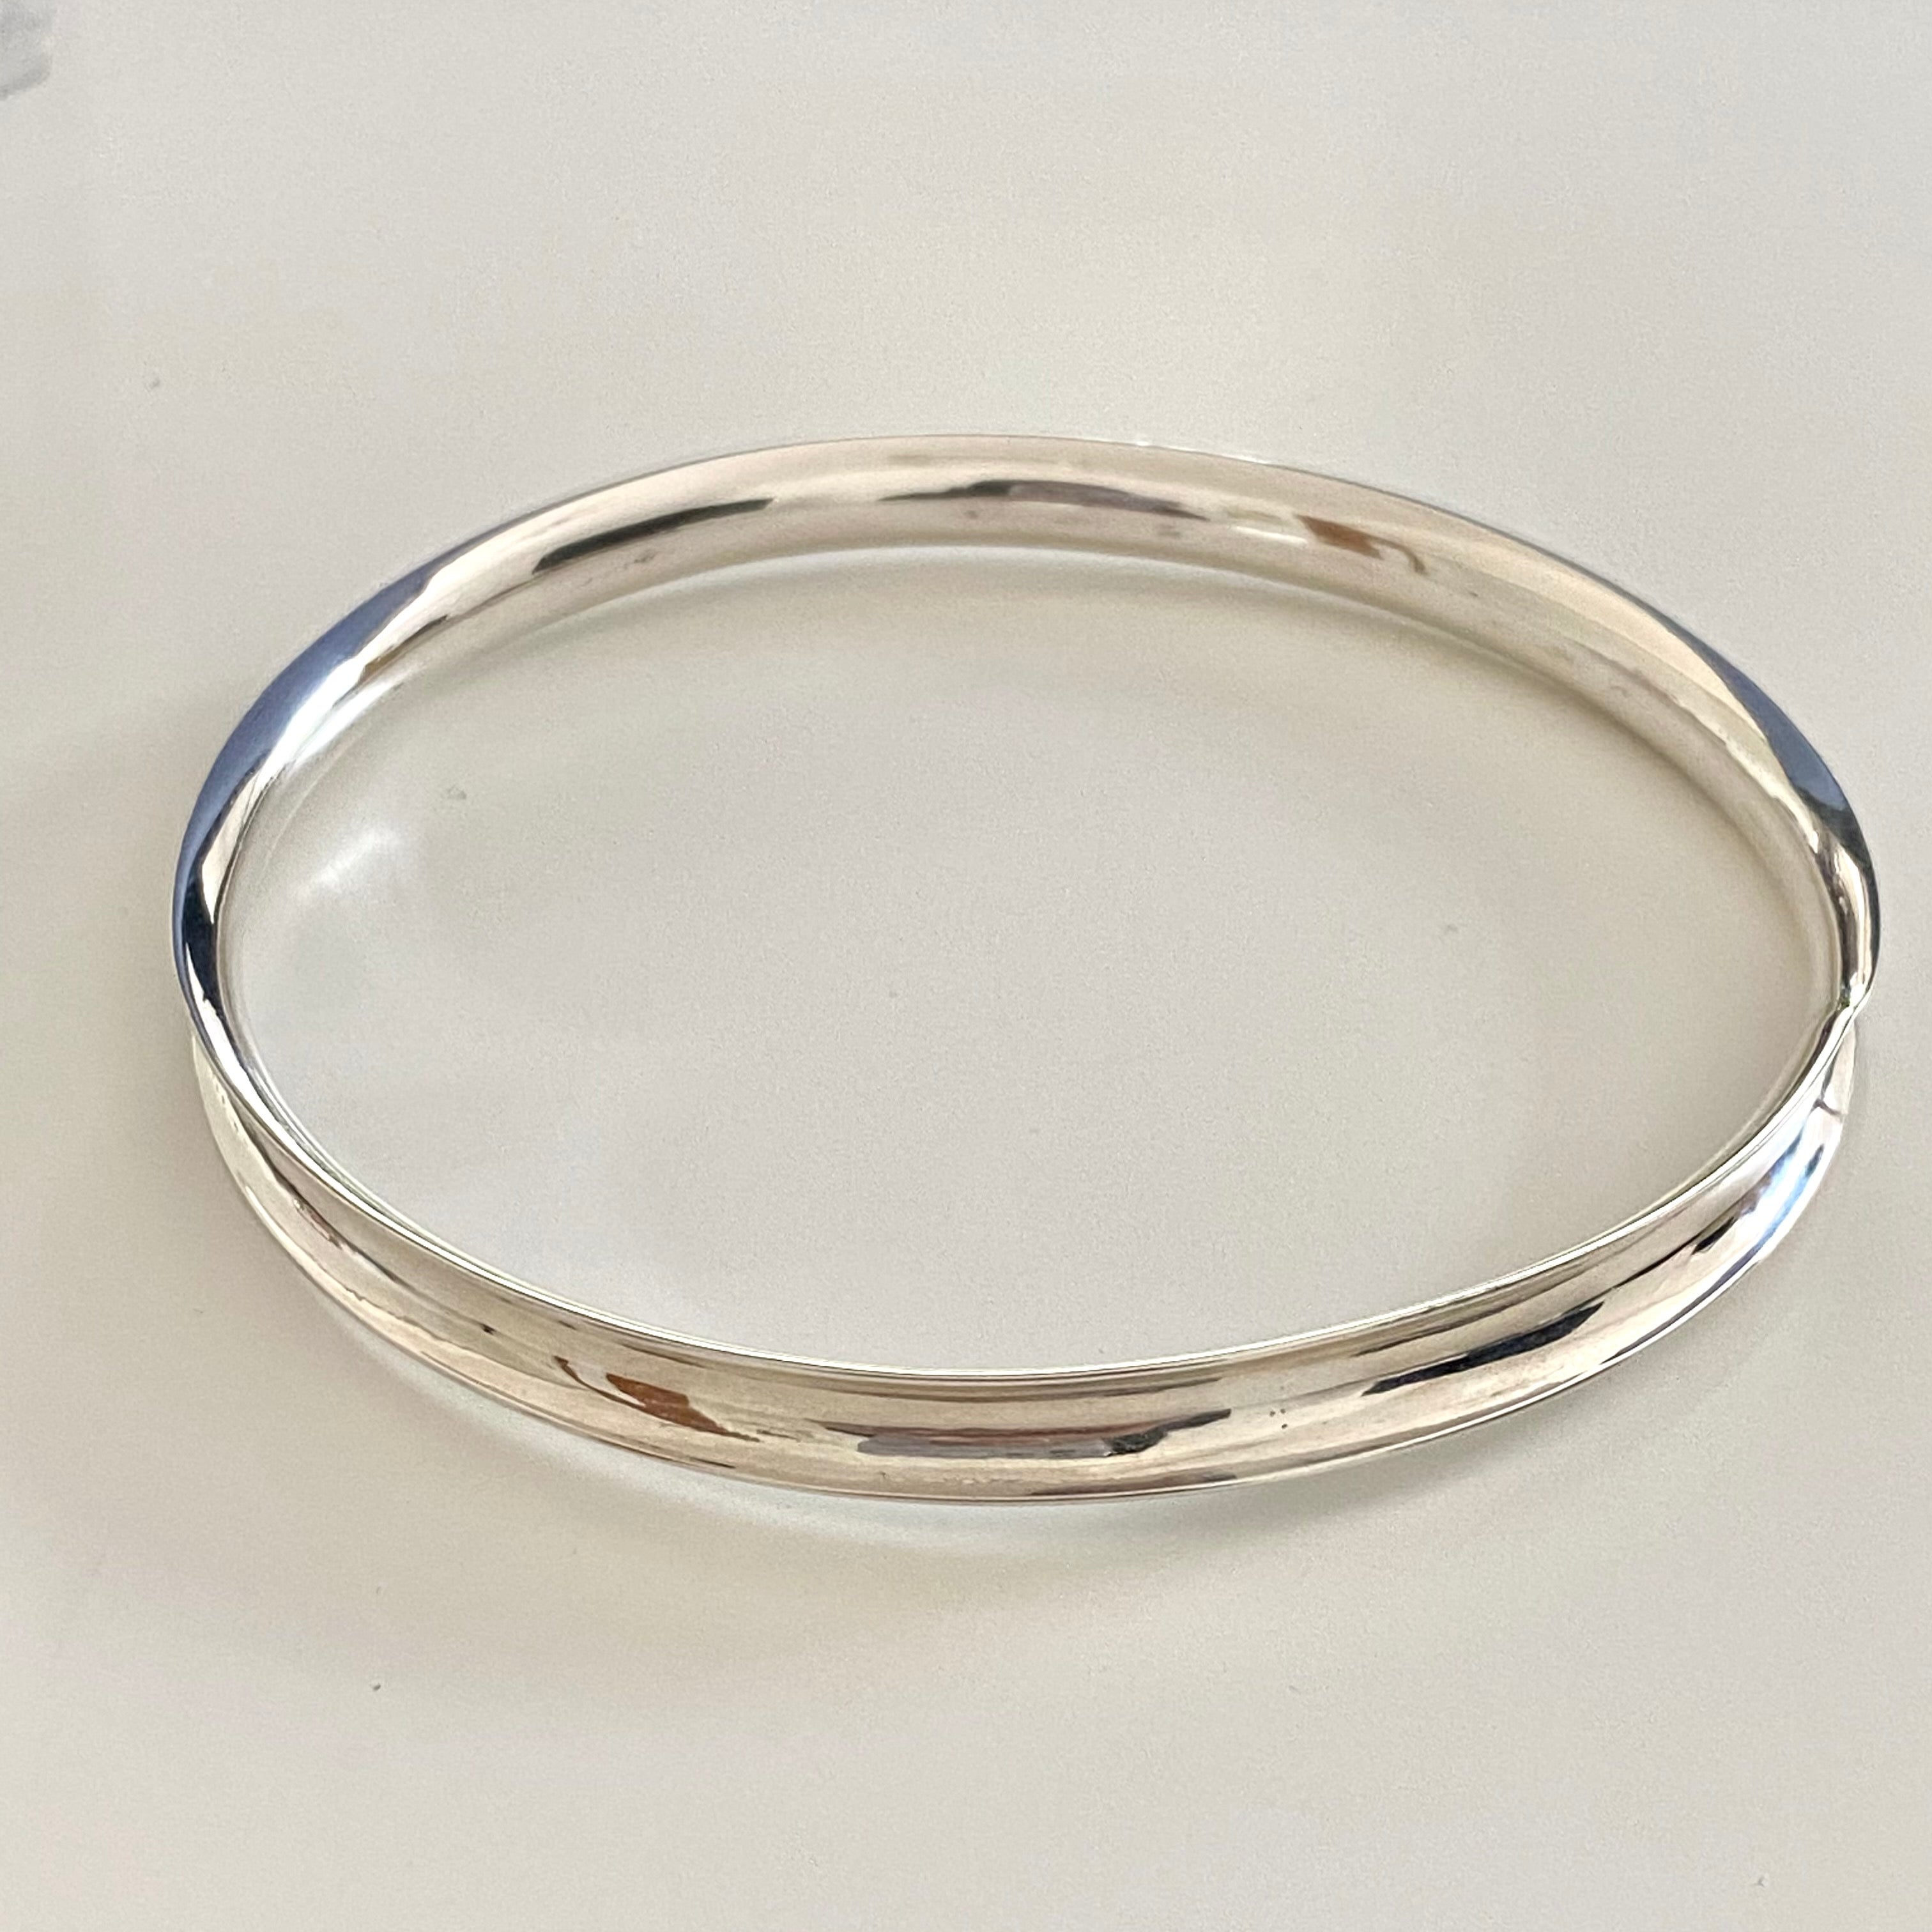 Round Sterling Silver 5mm wide Concave Bangle with a Polished Shiny Finish